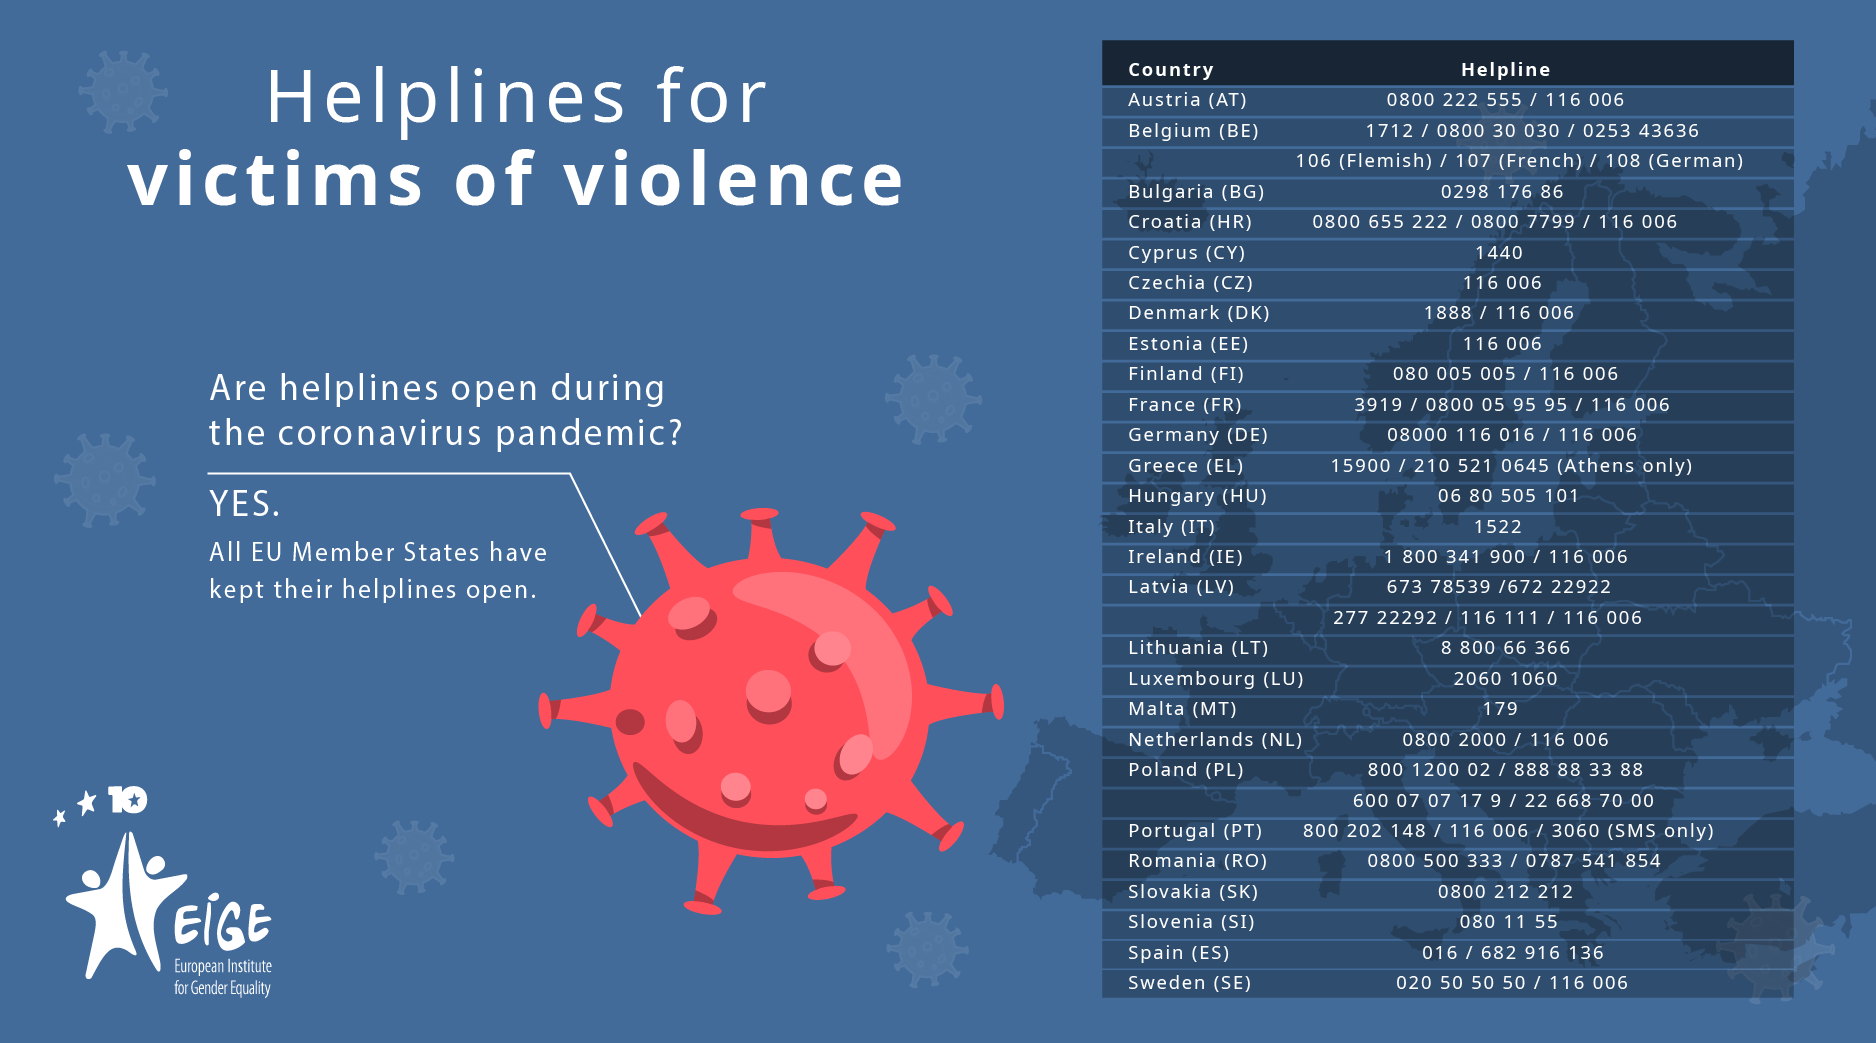 Thumbnail of the Helplines for victims of violence infographic